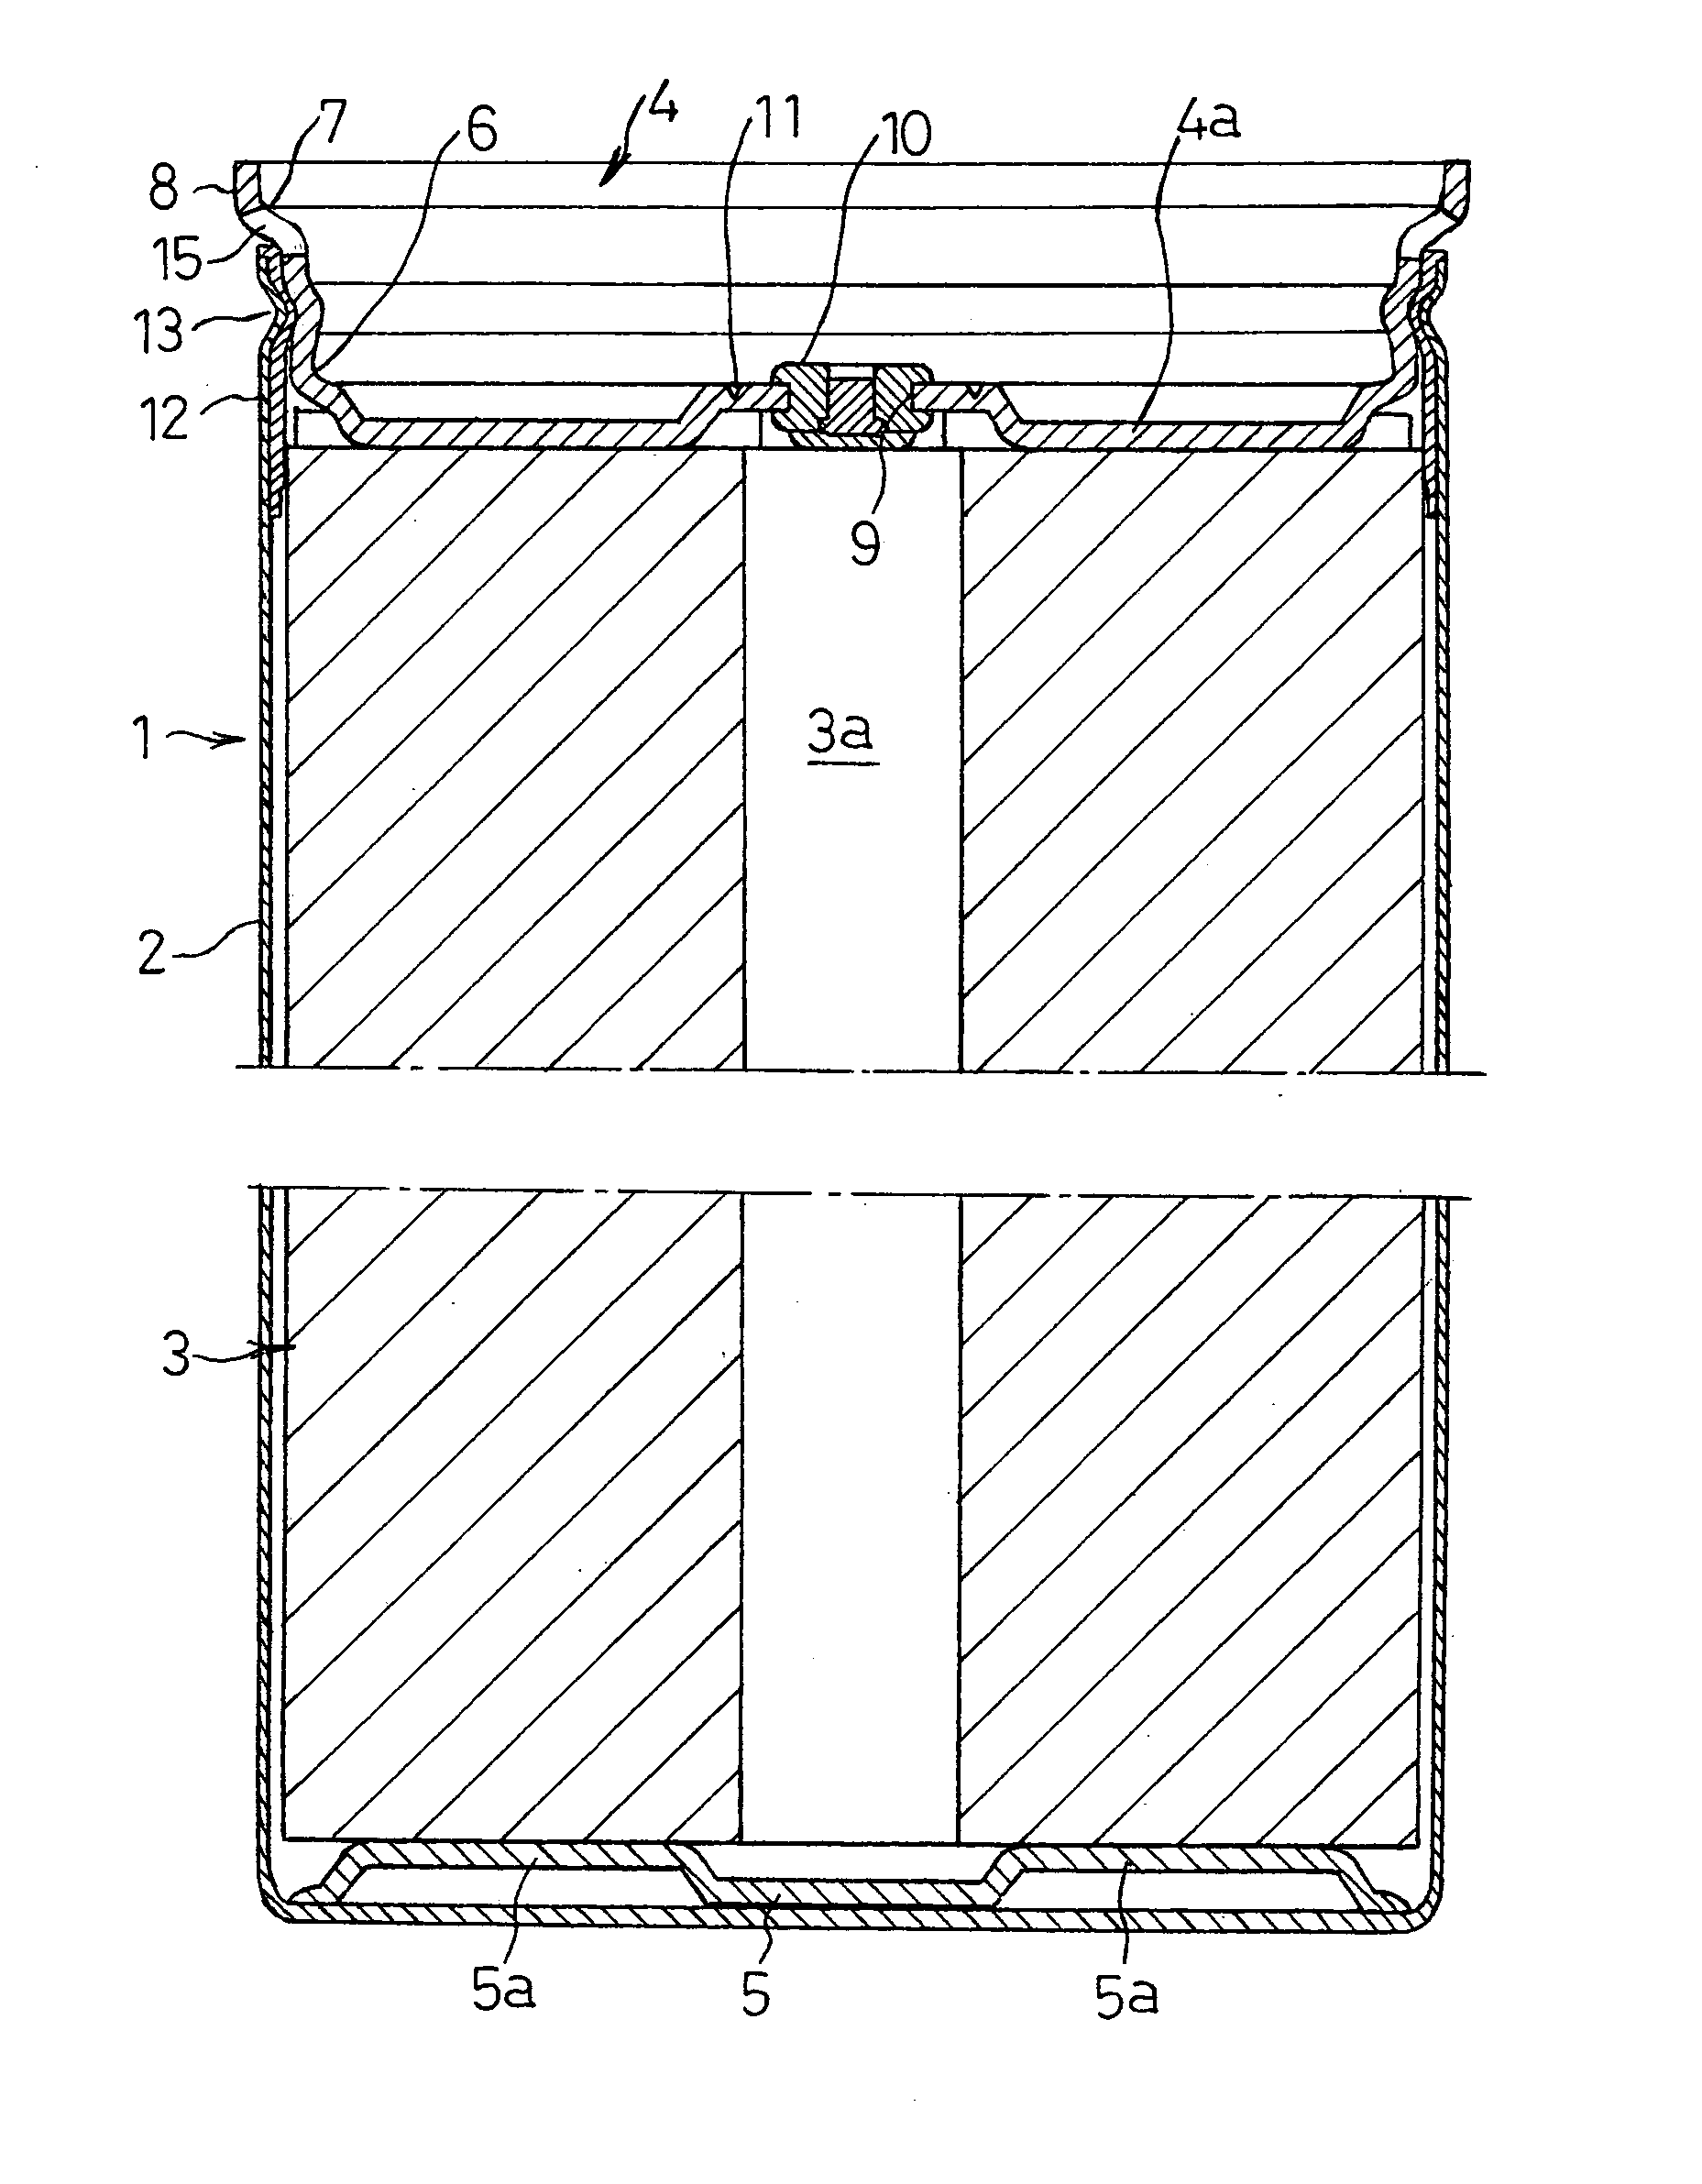 Battery and battery assembly